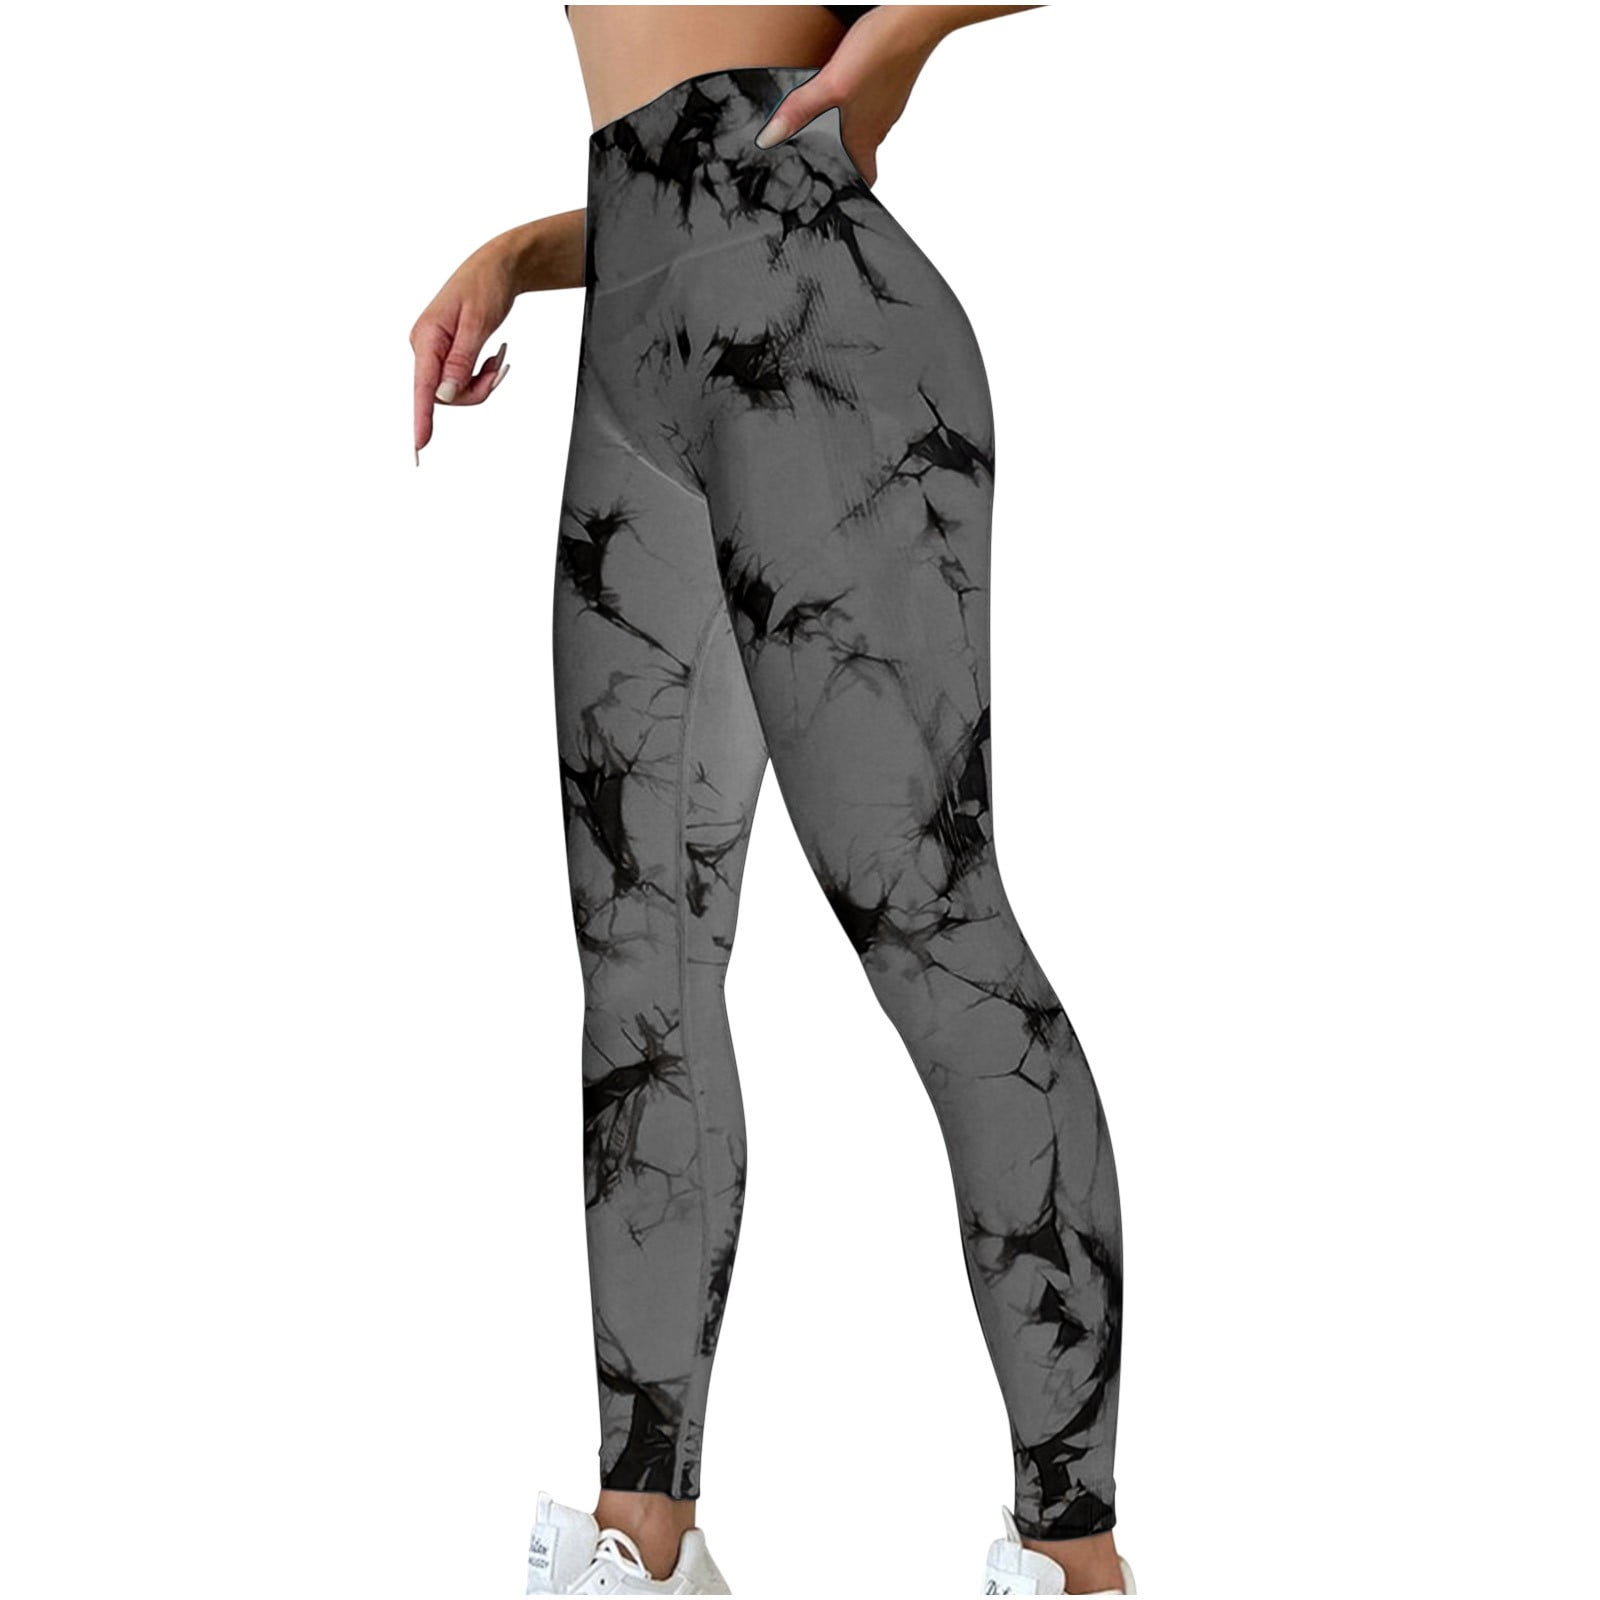 www. - Honeycomb Skull Fitness Legging Solid Color Sexy